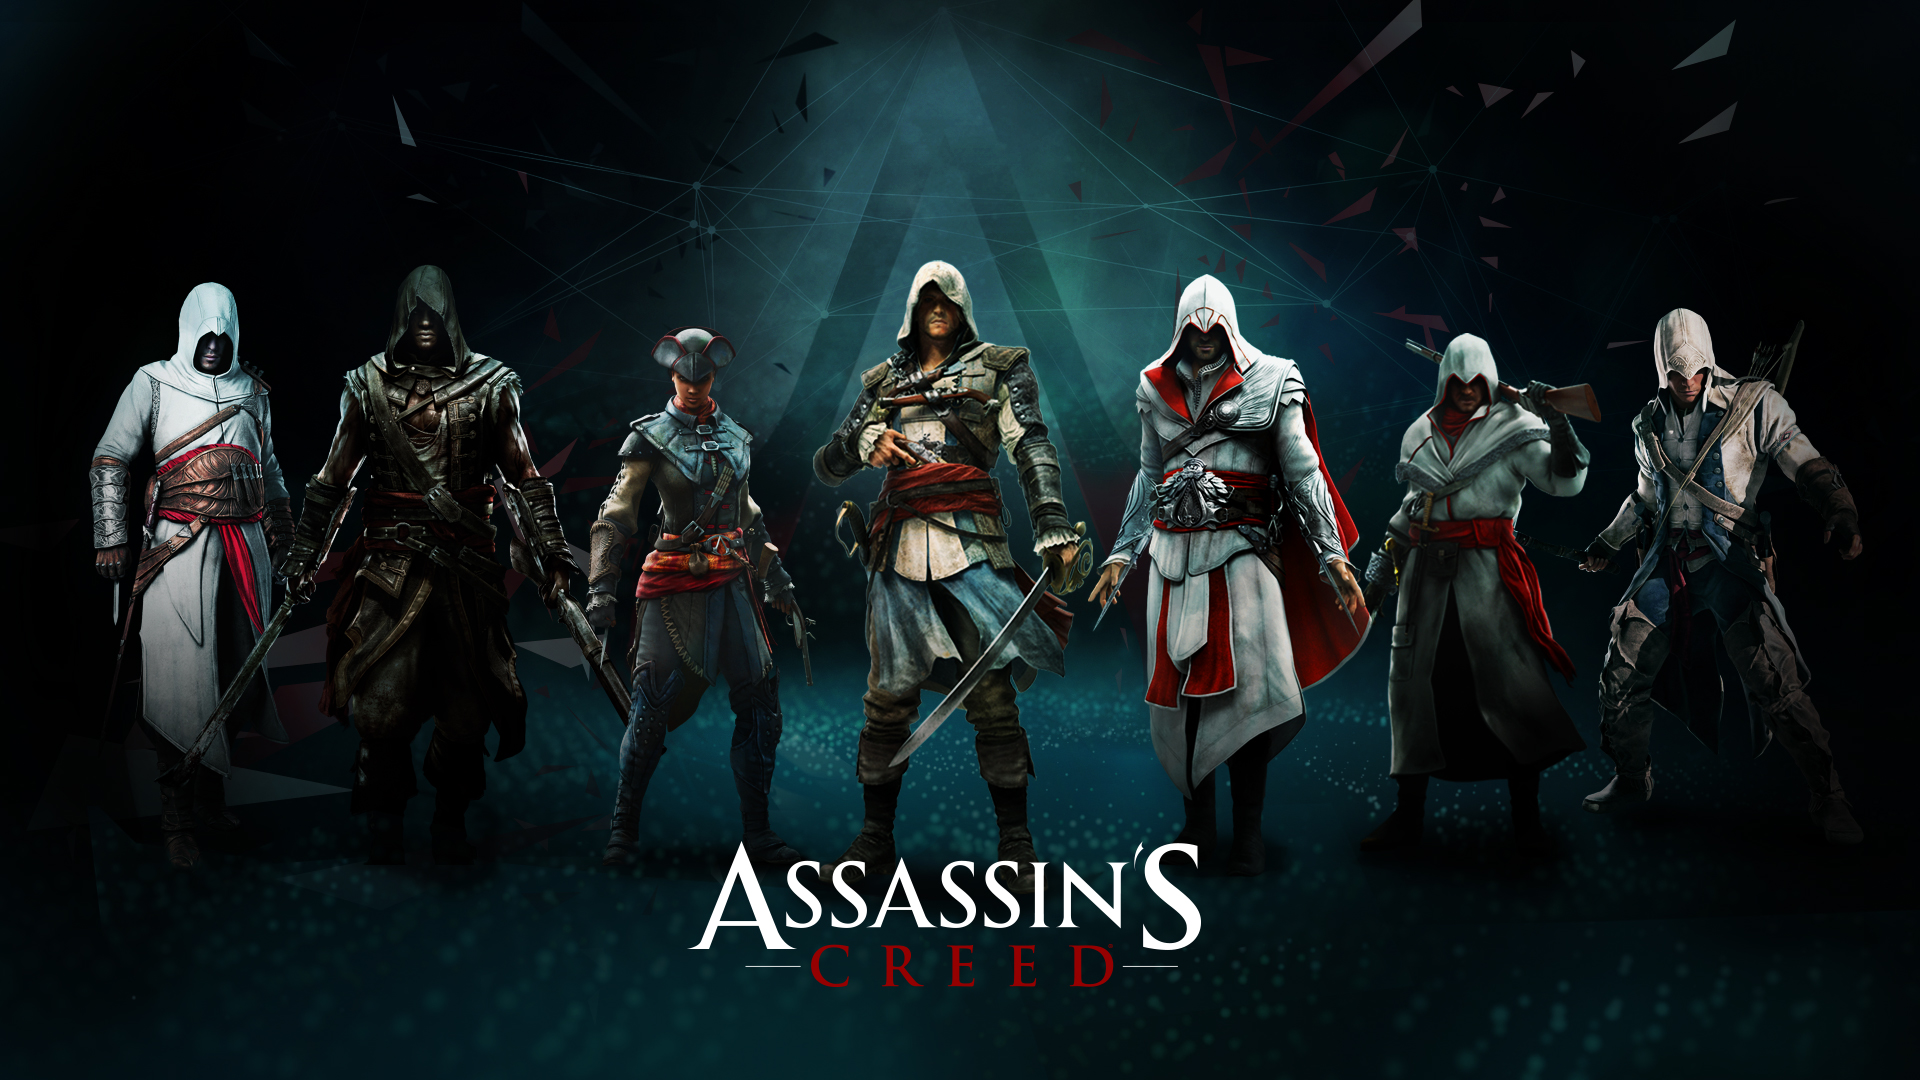 connor (assassin's creed), ezio (assassin's creed), video game, assassin's creed, altair (assassin's creed), edward kenway cellphone